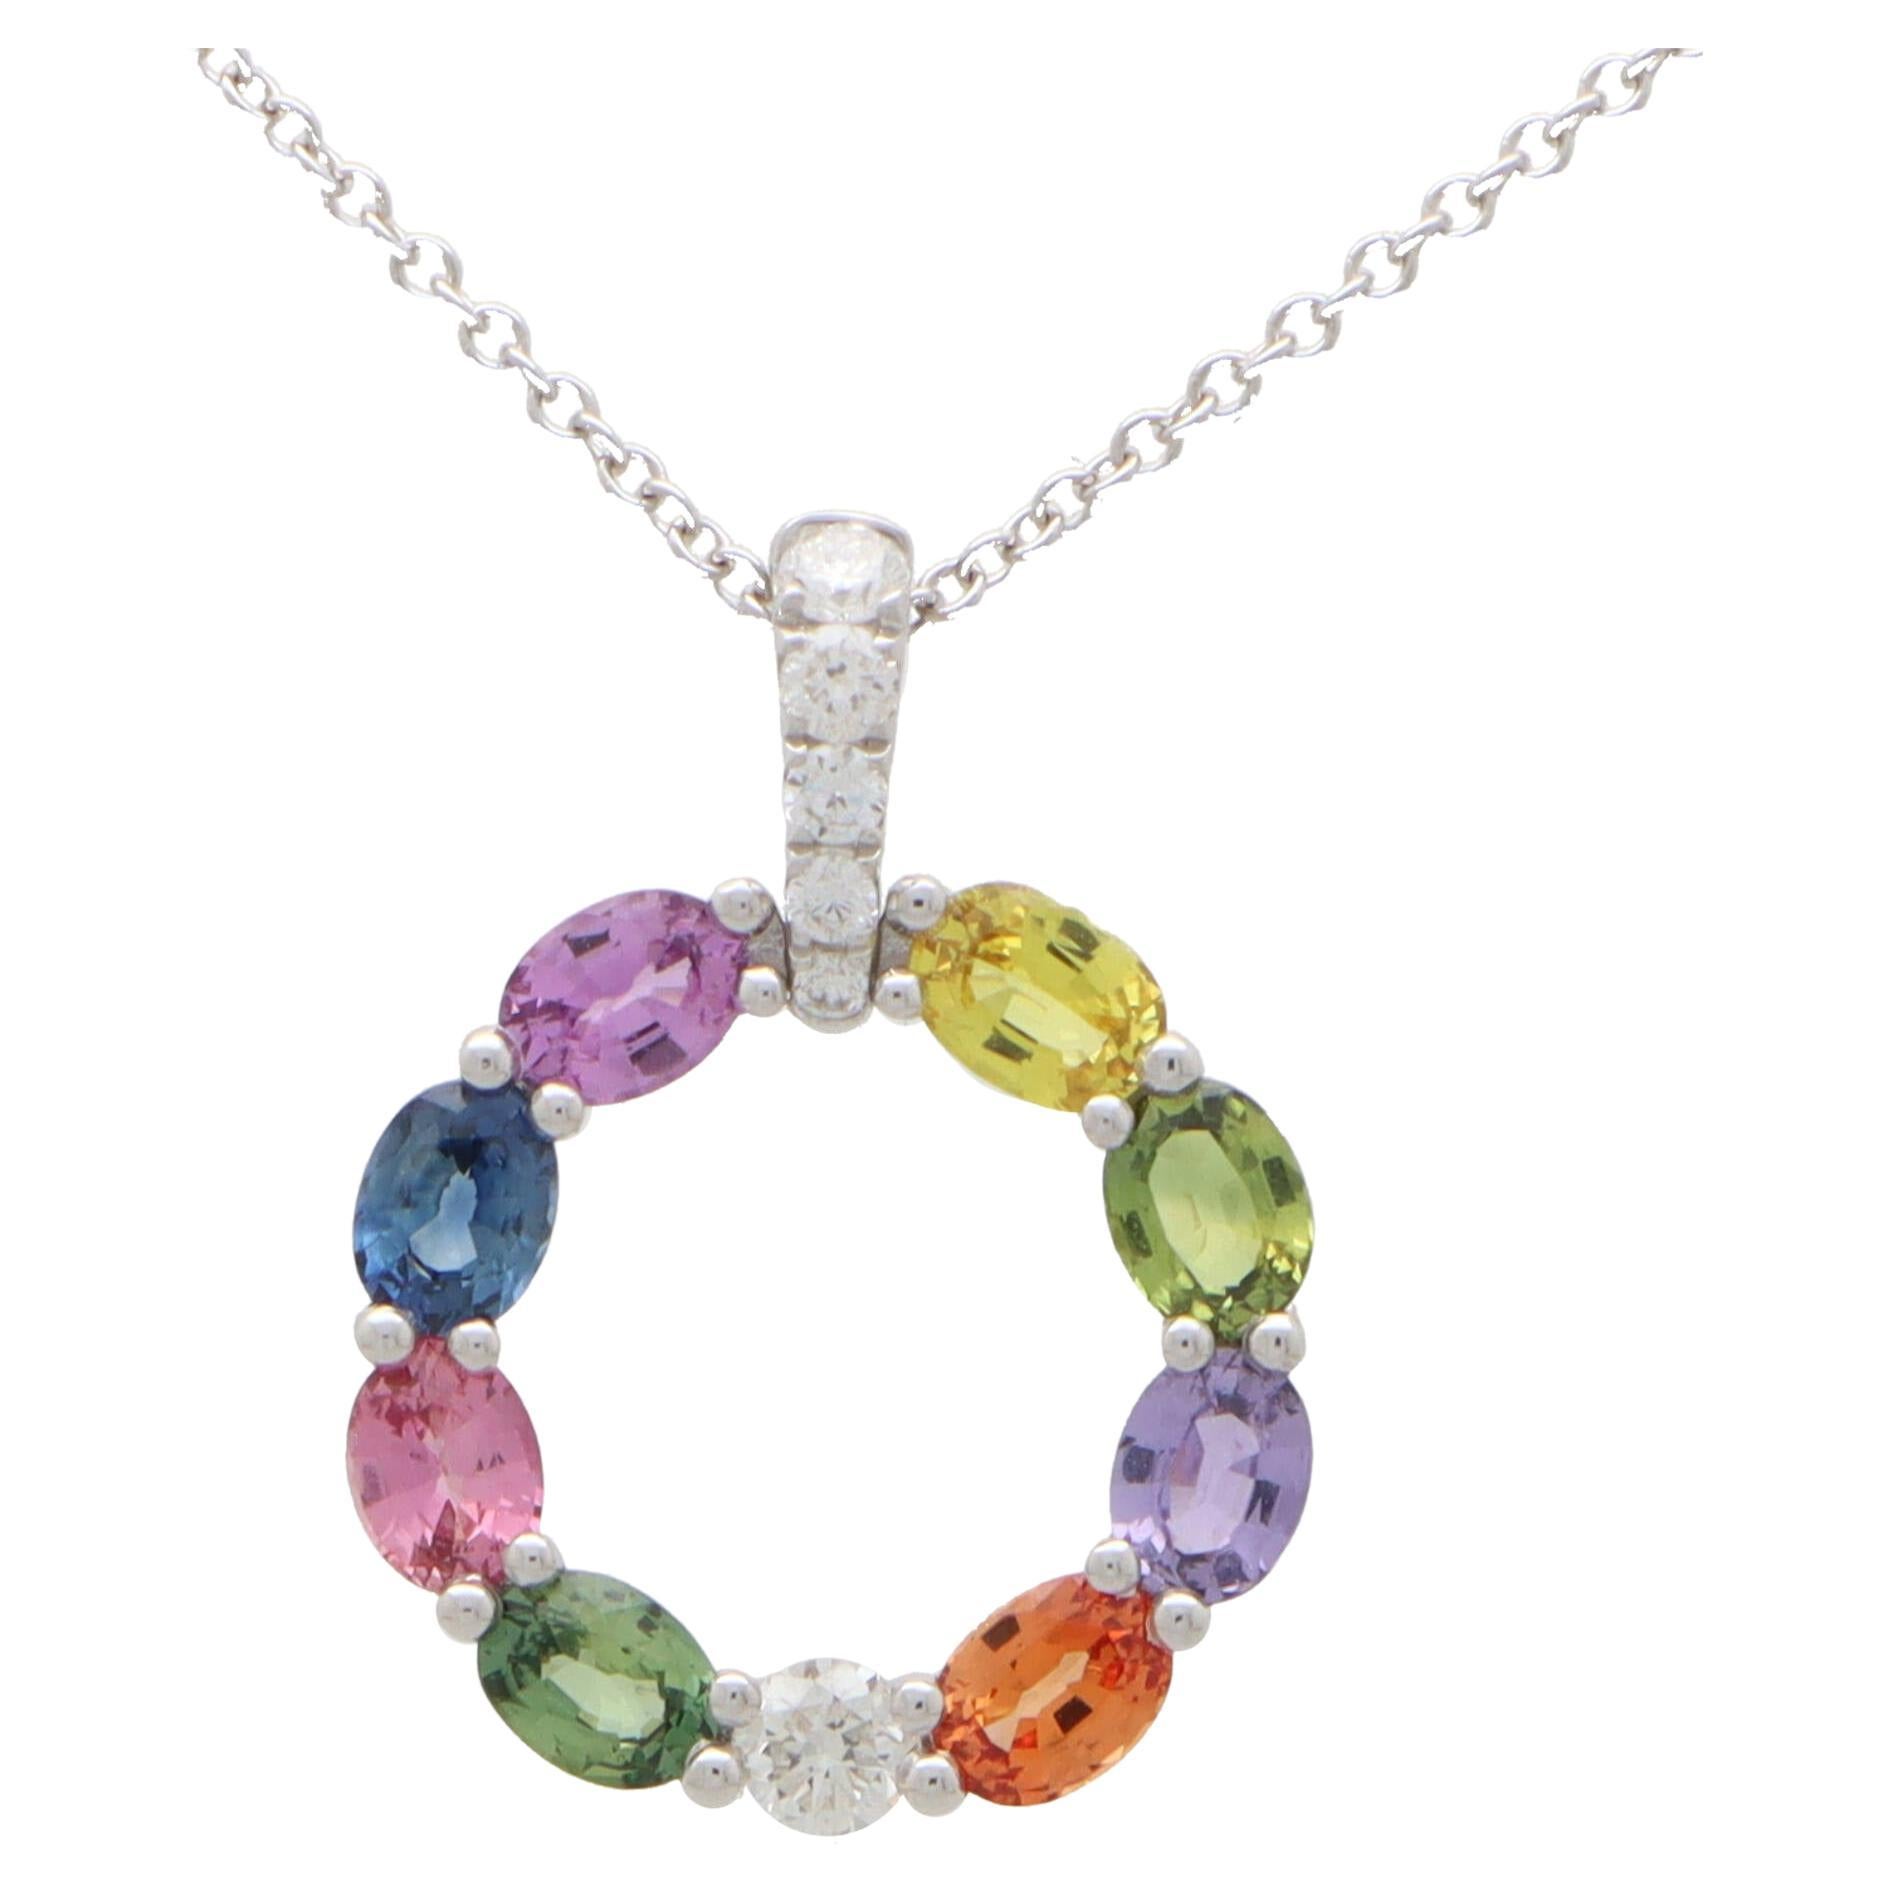 Rainbow Sapphire and Diamond Pendant Necklace Set in 18k White Gold